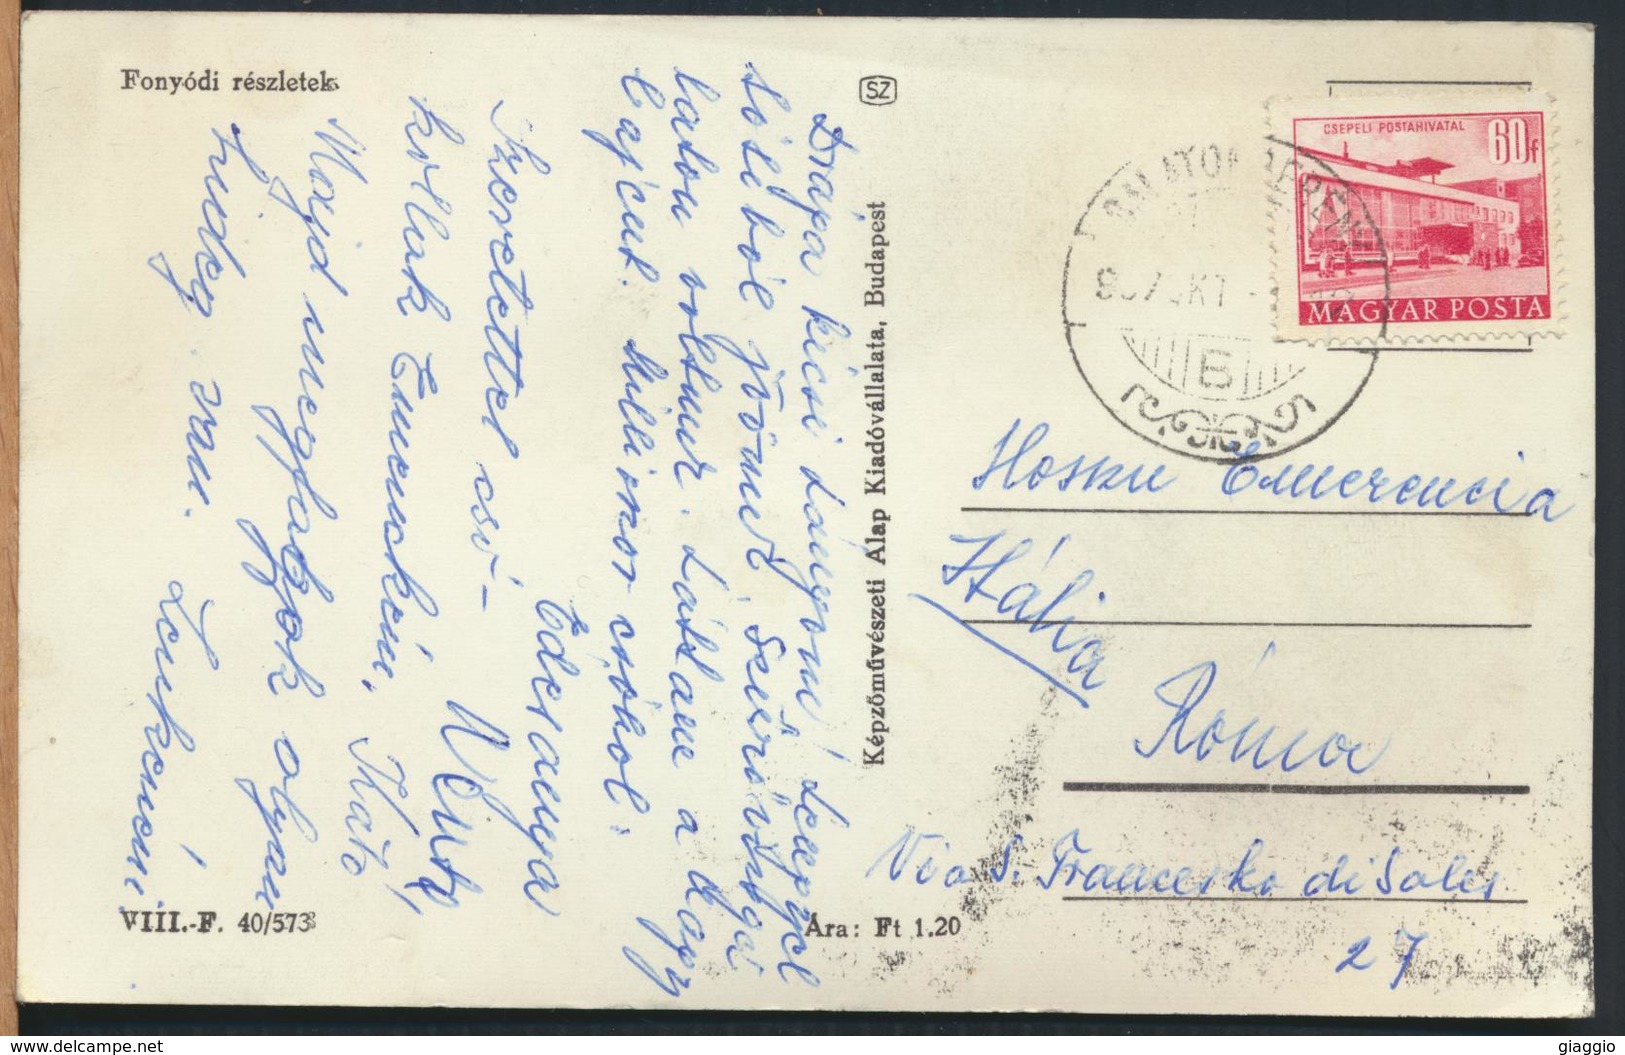 °°° 13232 - HUNGARY - FONYODI RESZLETEK - 1957 With Stamps °°° - Ungheria